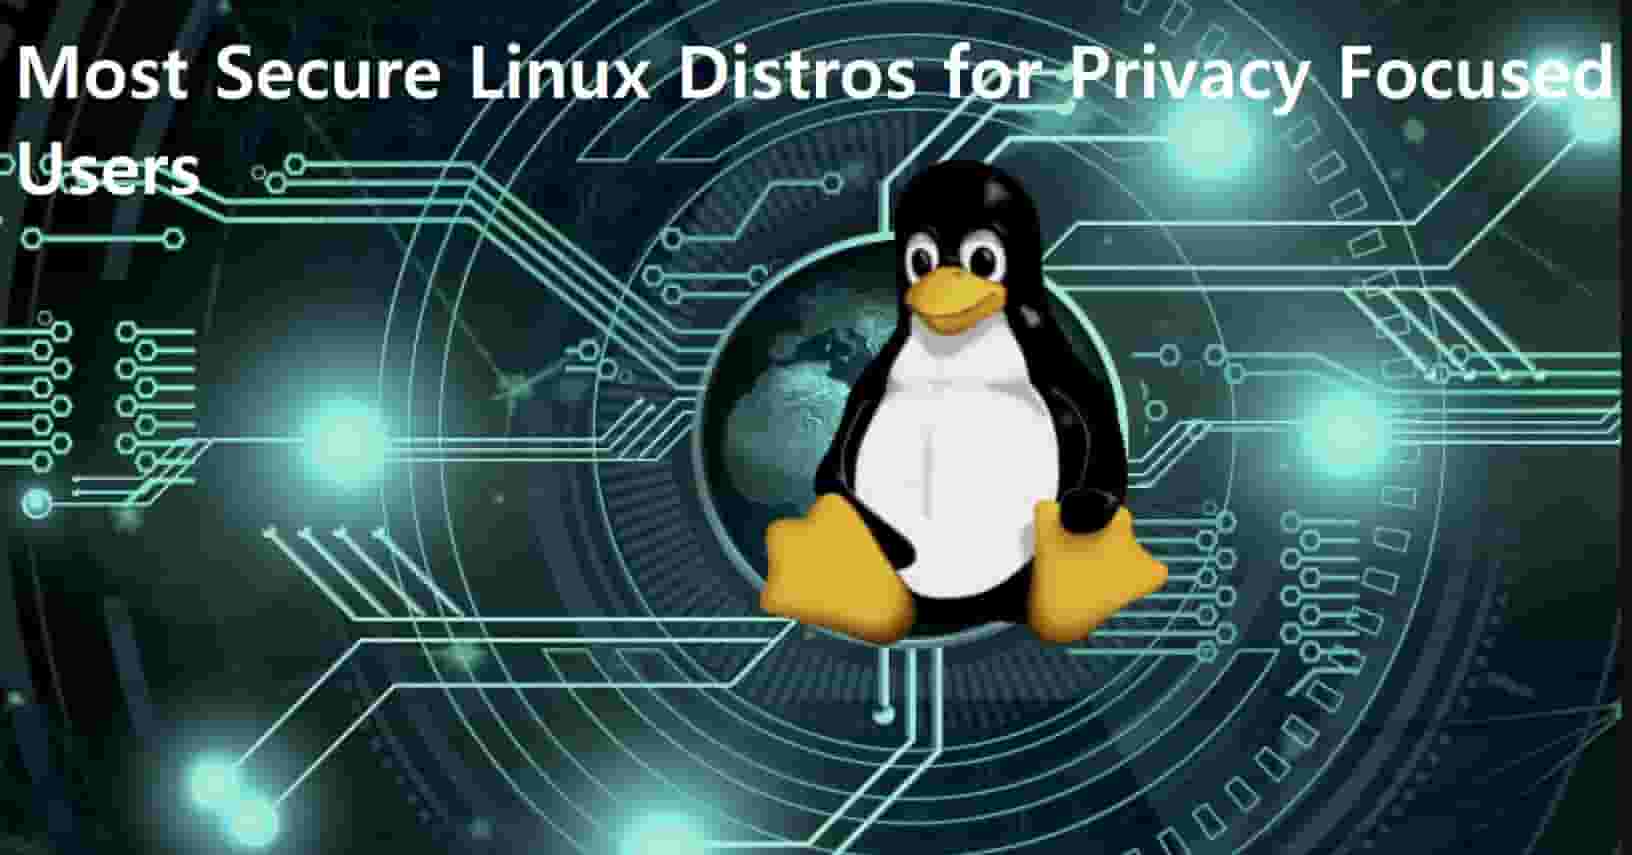 10 Most Secure Linux Distros for Security, Anonymity, Privacy 2022